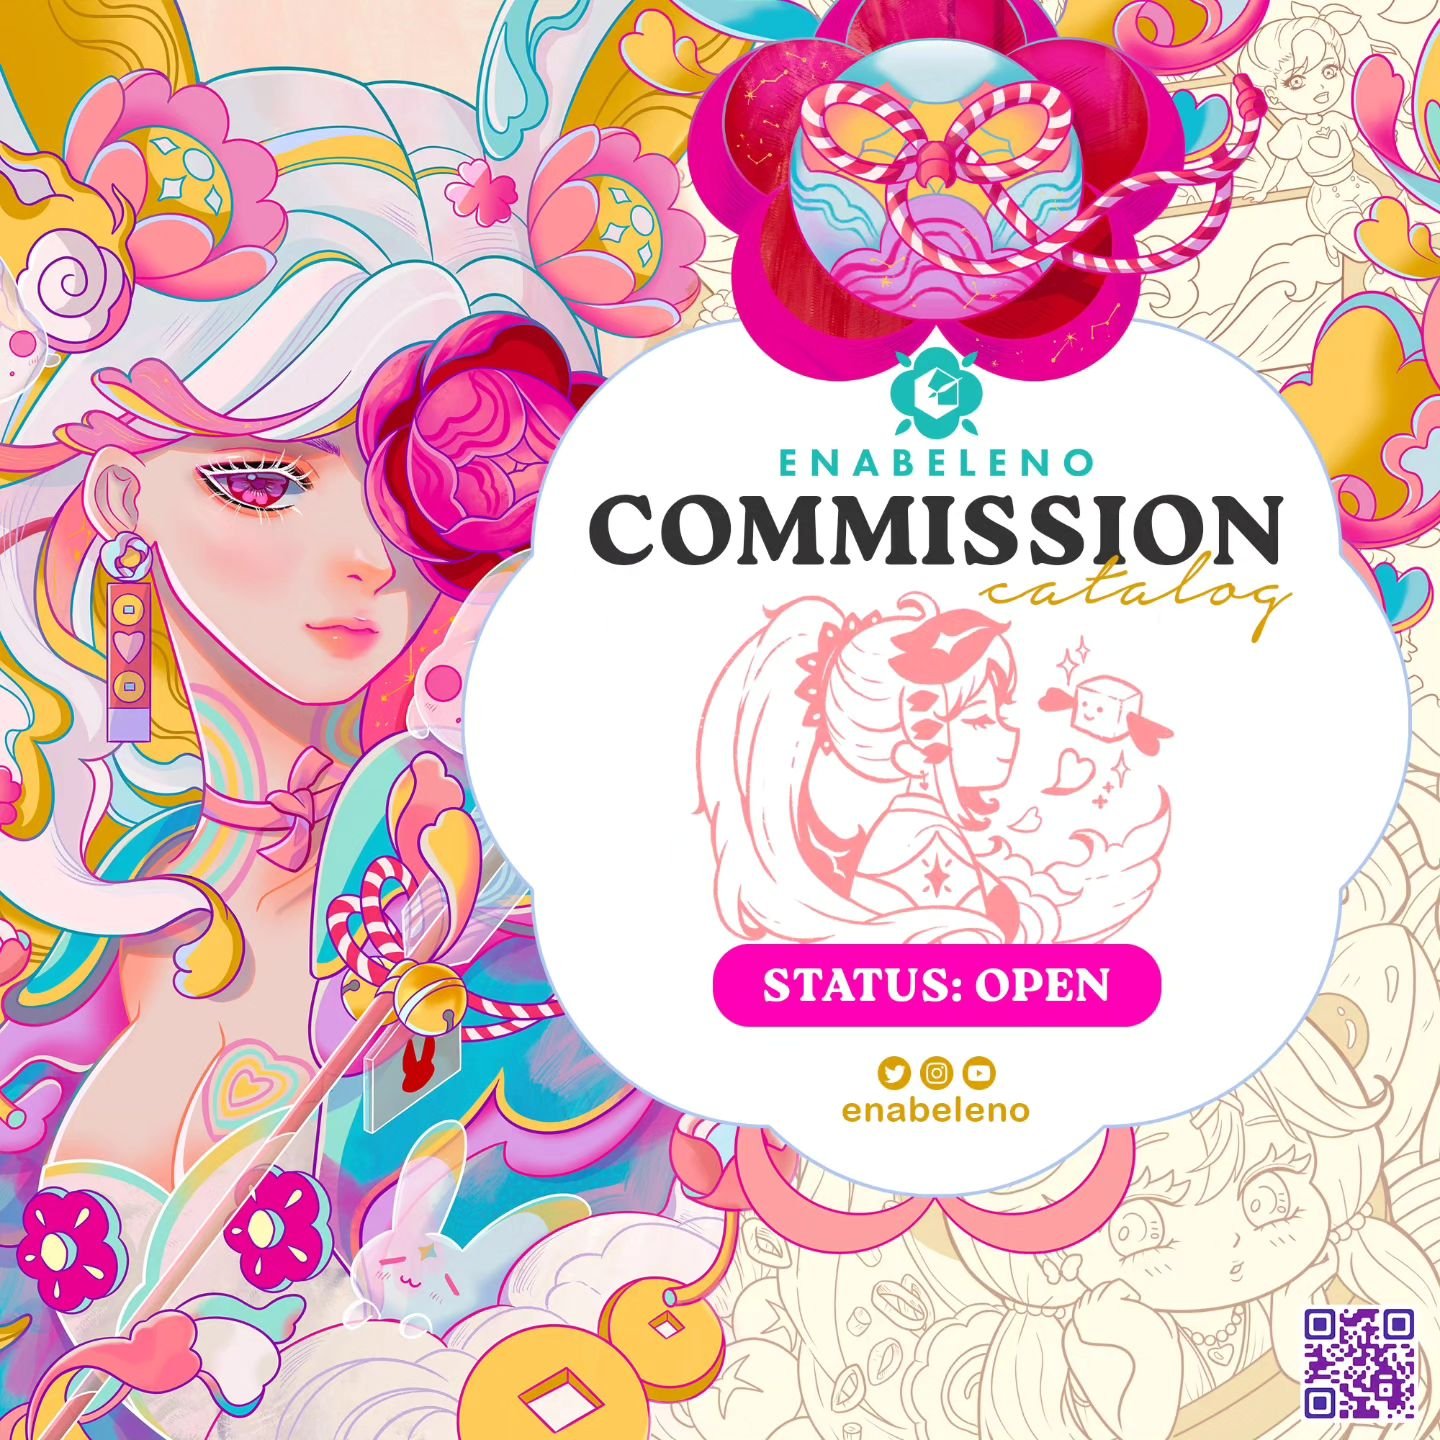 Hello friends, I am open for commission. Here is my commission catalog. You can reserve a slot via Google Form or VGen. Please read all Terms of Service before sending a request.

For more details, image samples and TOS, please visit:
✨️ https://www.